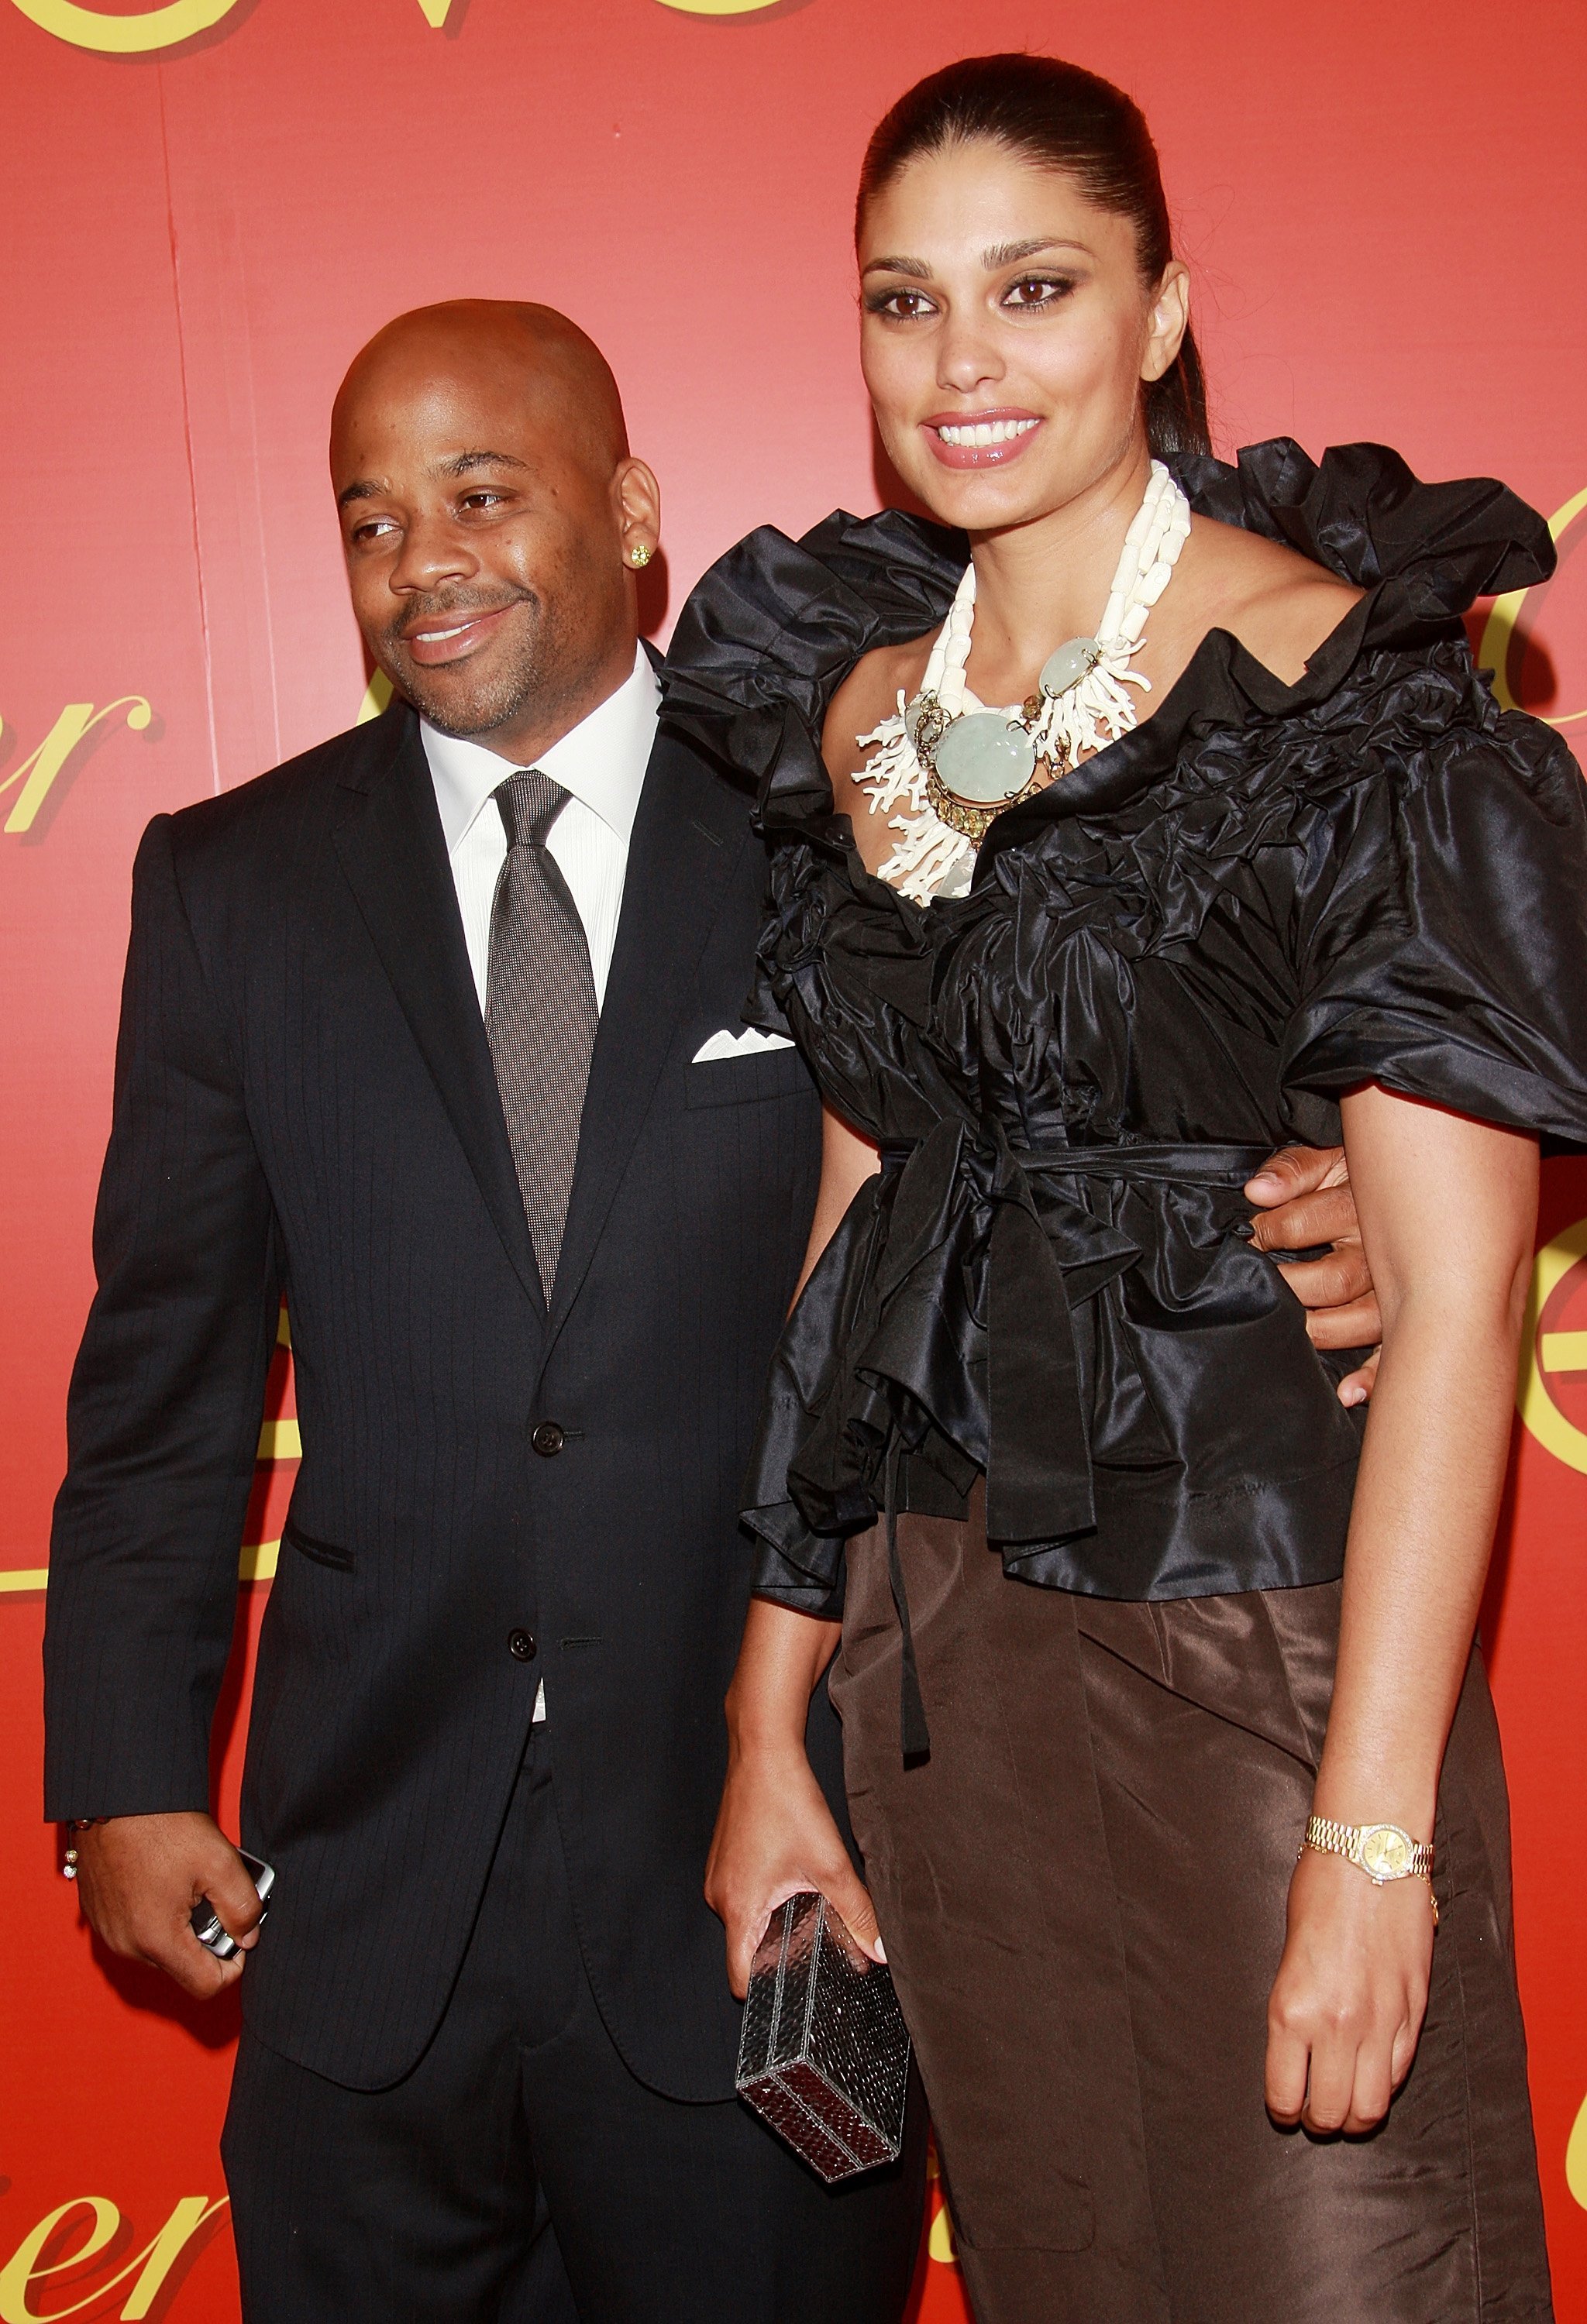 Damon Dash and Rachel Roy during their marriage in 2007 and attending a cocktail party to celebrate The Cartier Charity Love Bracelet at the Cartier Mansion in New York. | Photo: Getty Images